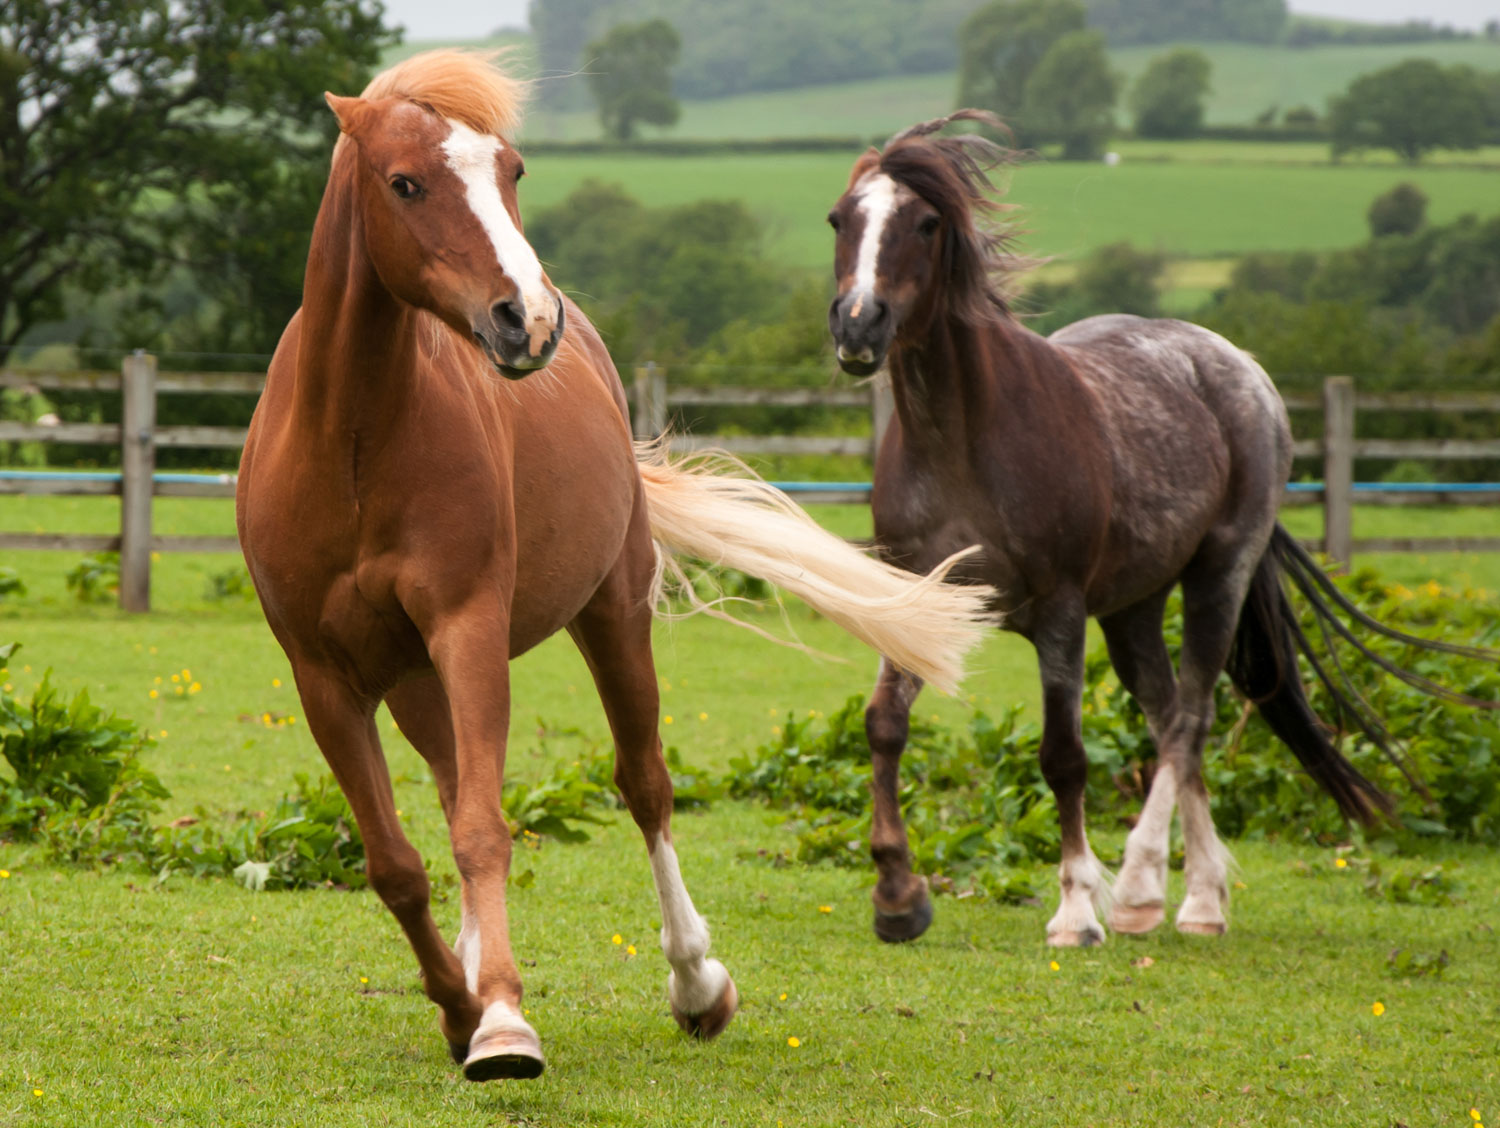 House Flies vs. Stable Flies. Which Flies Are Bugging Your Horse?